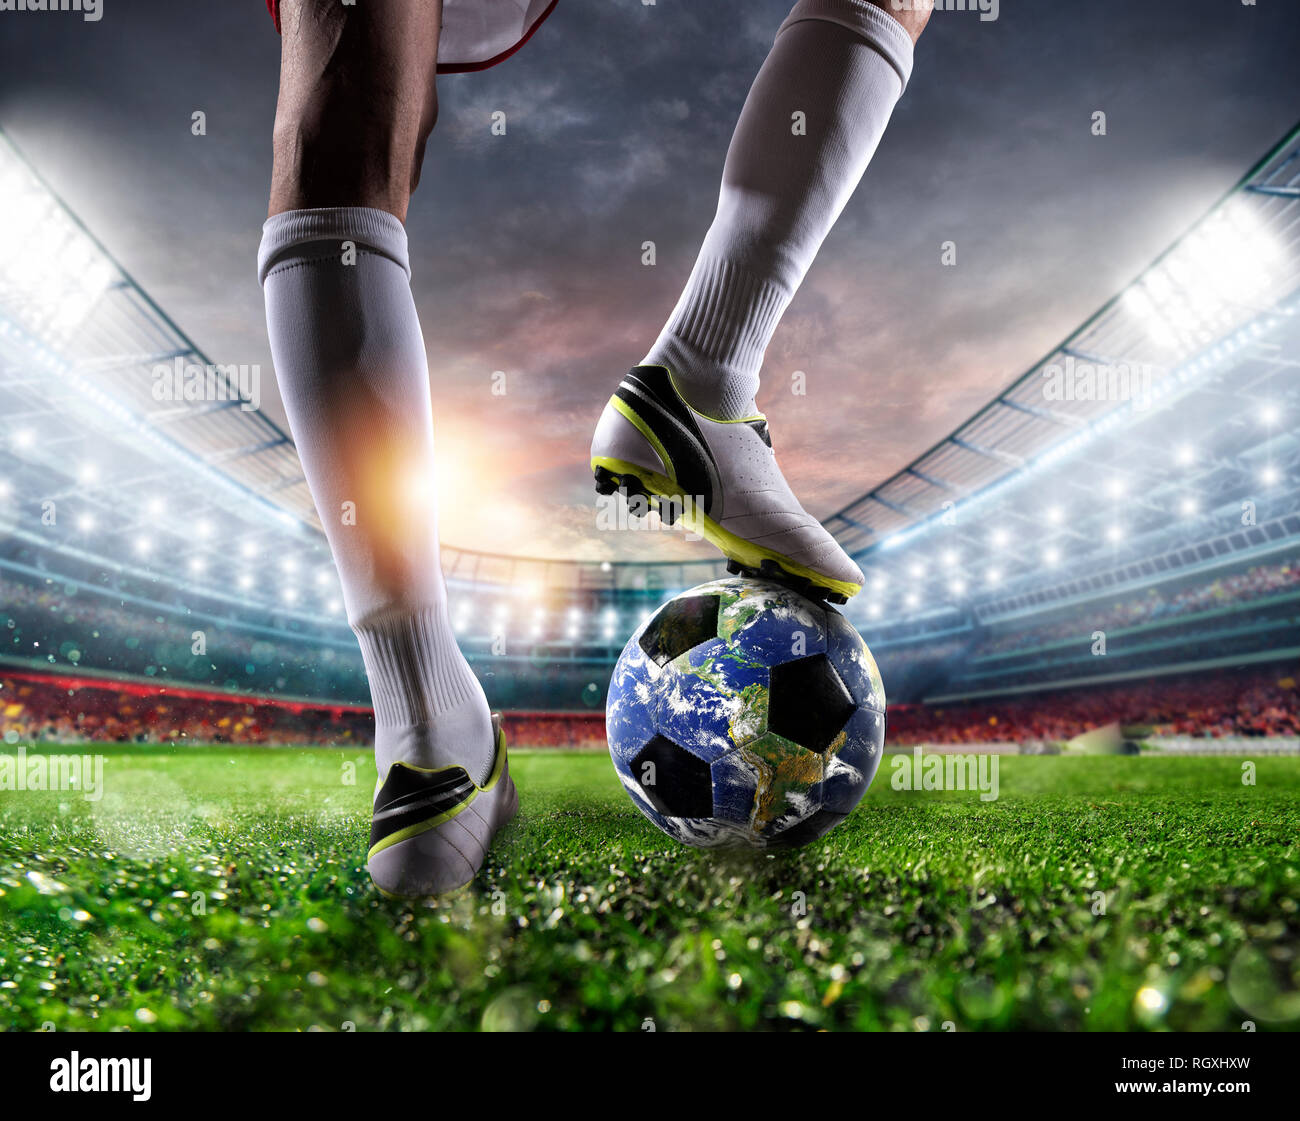 Player with a soccer ball a as world. Earth provided by NASA. Stock Photo